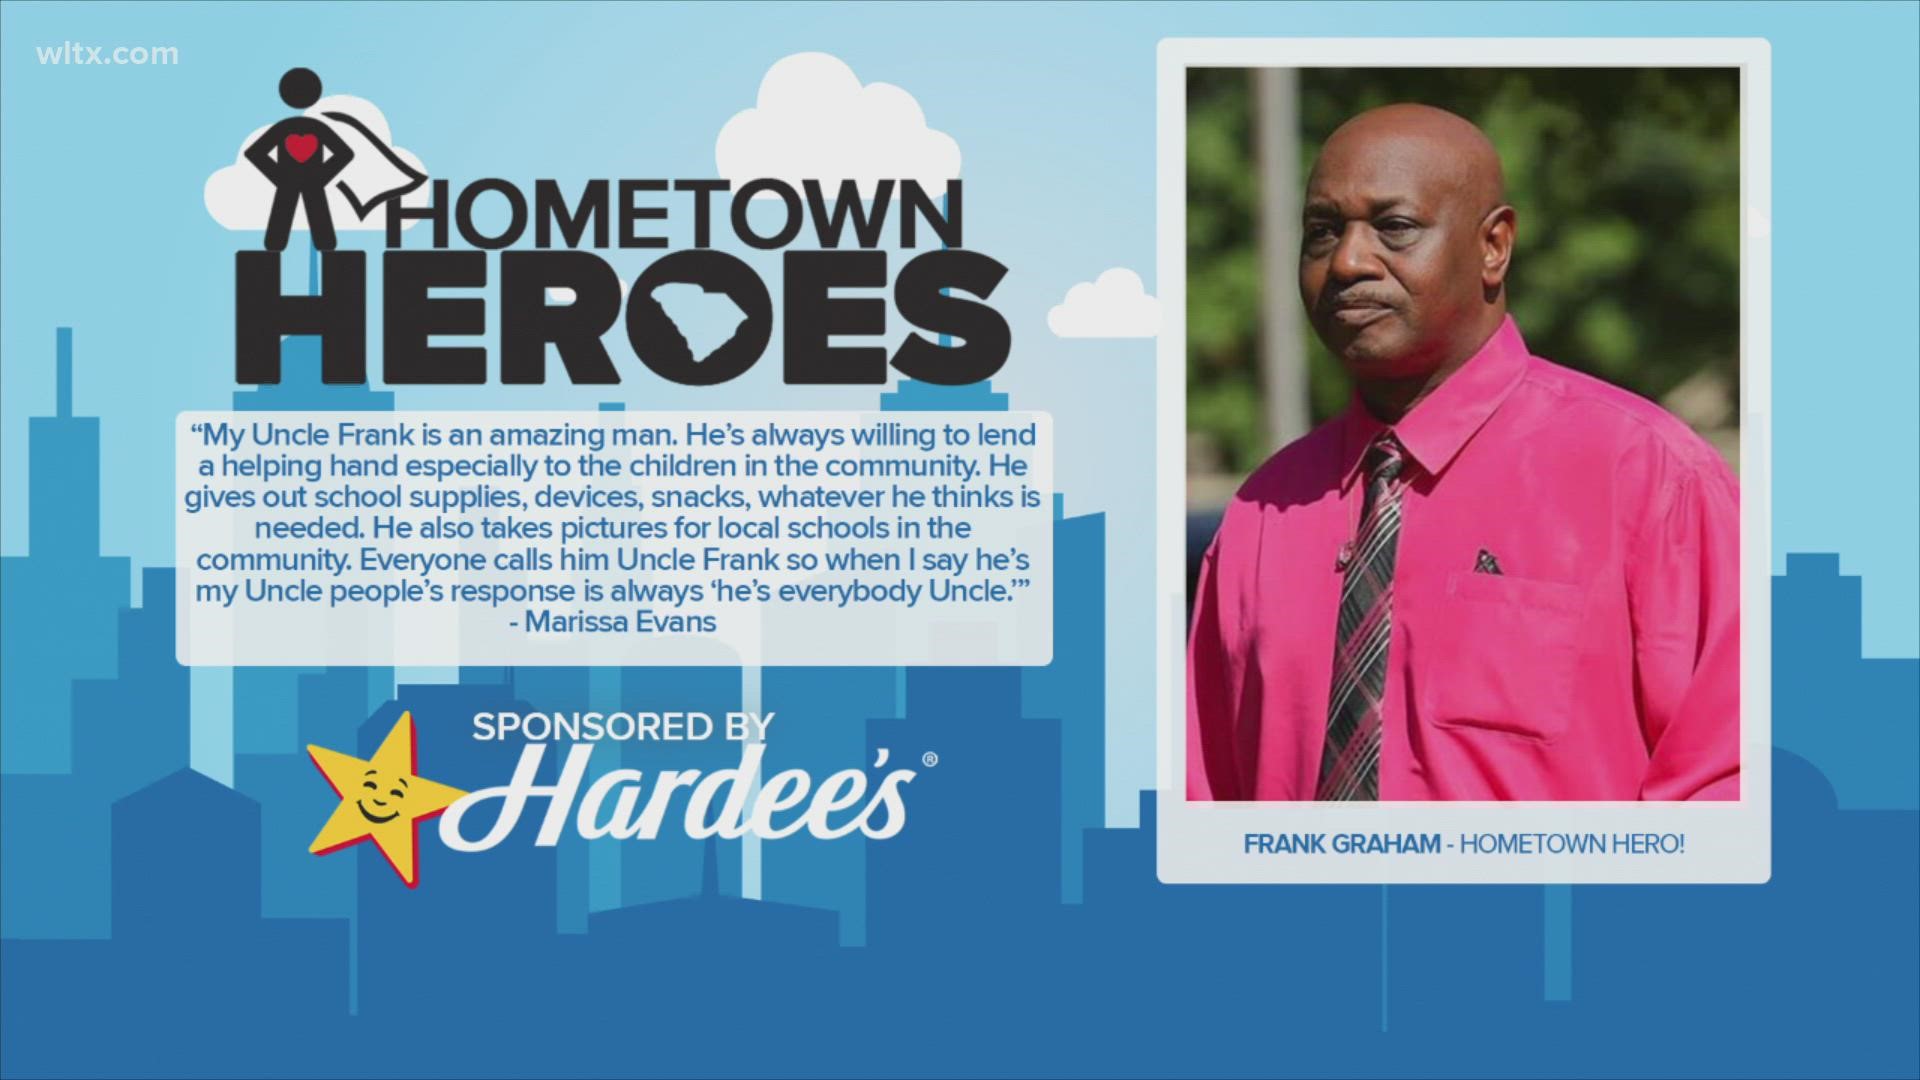 We're recognizing a Hometown Hero nominated by his niece for his dedication to the community.